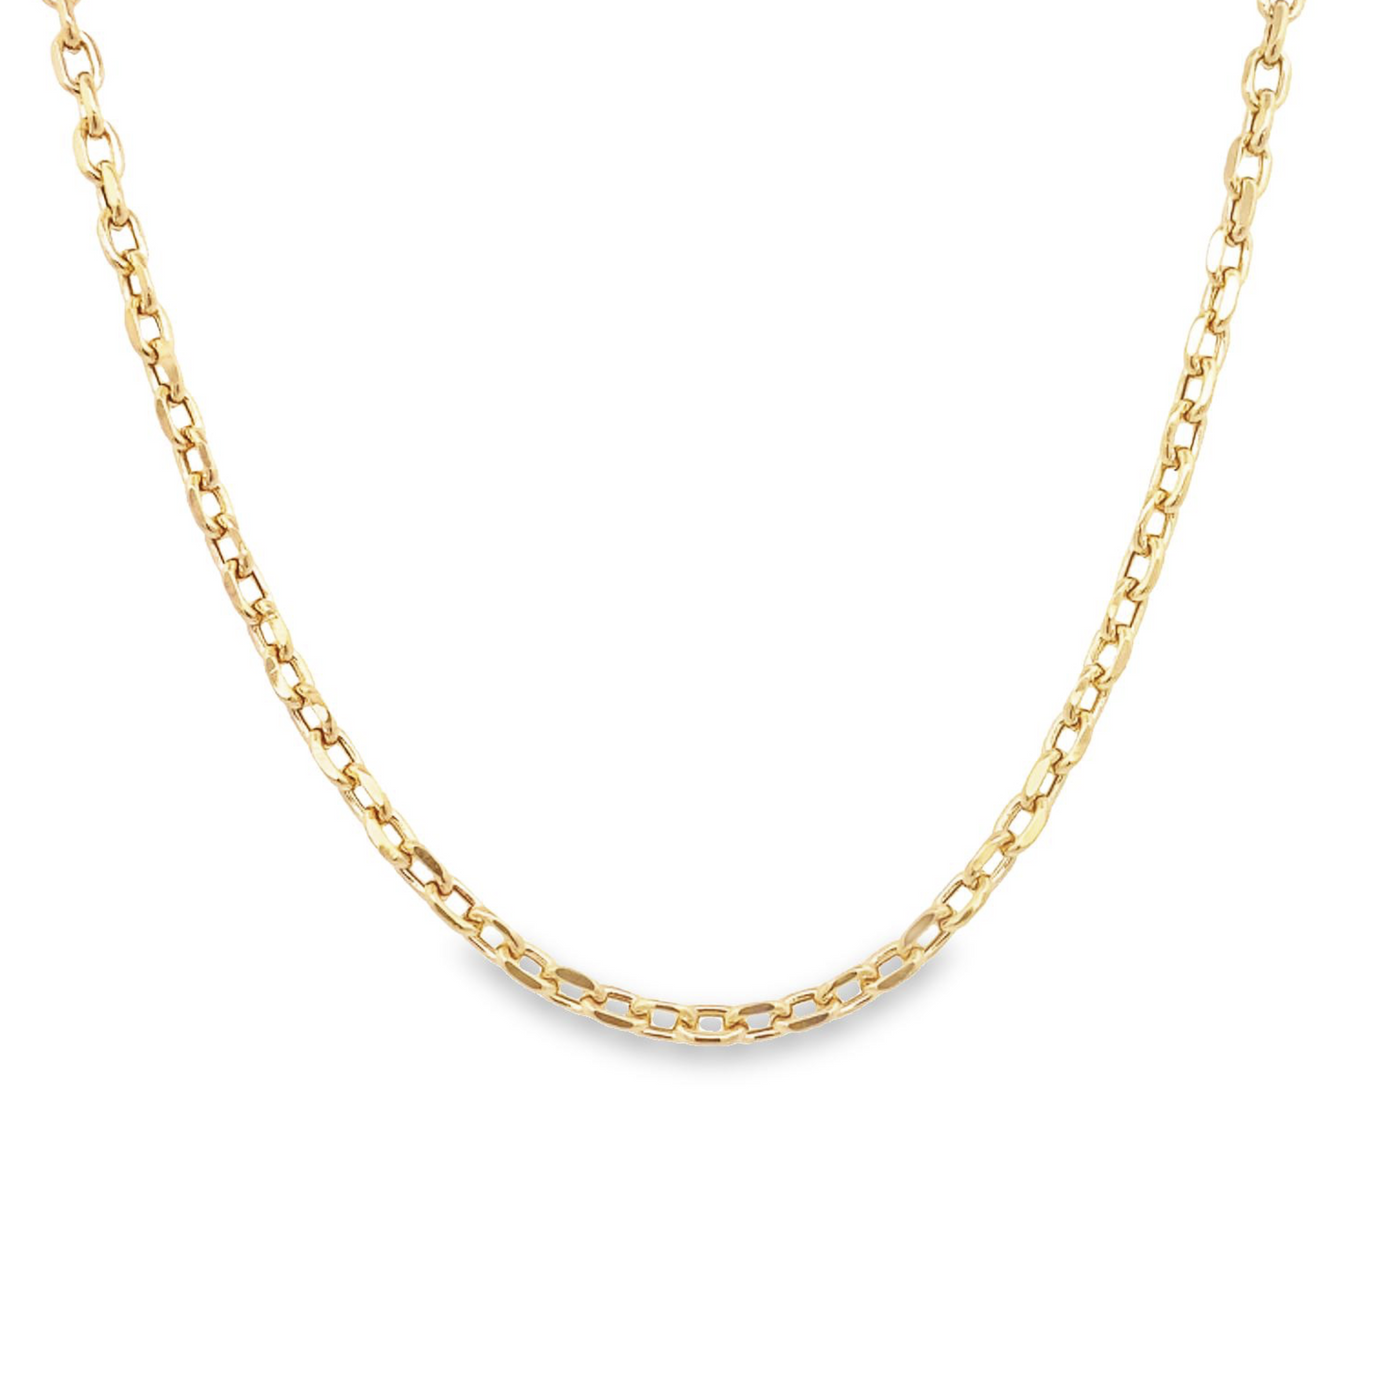 10 Karat Yellow Gold 3mm Squared Oval Link Chain